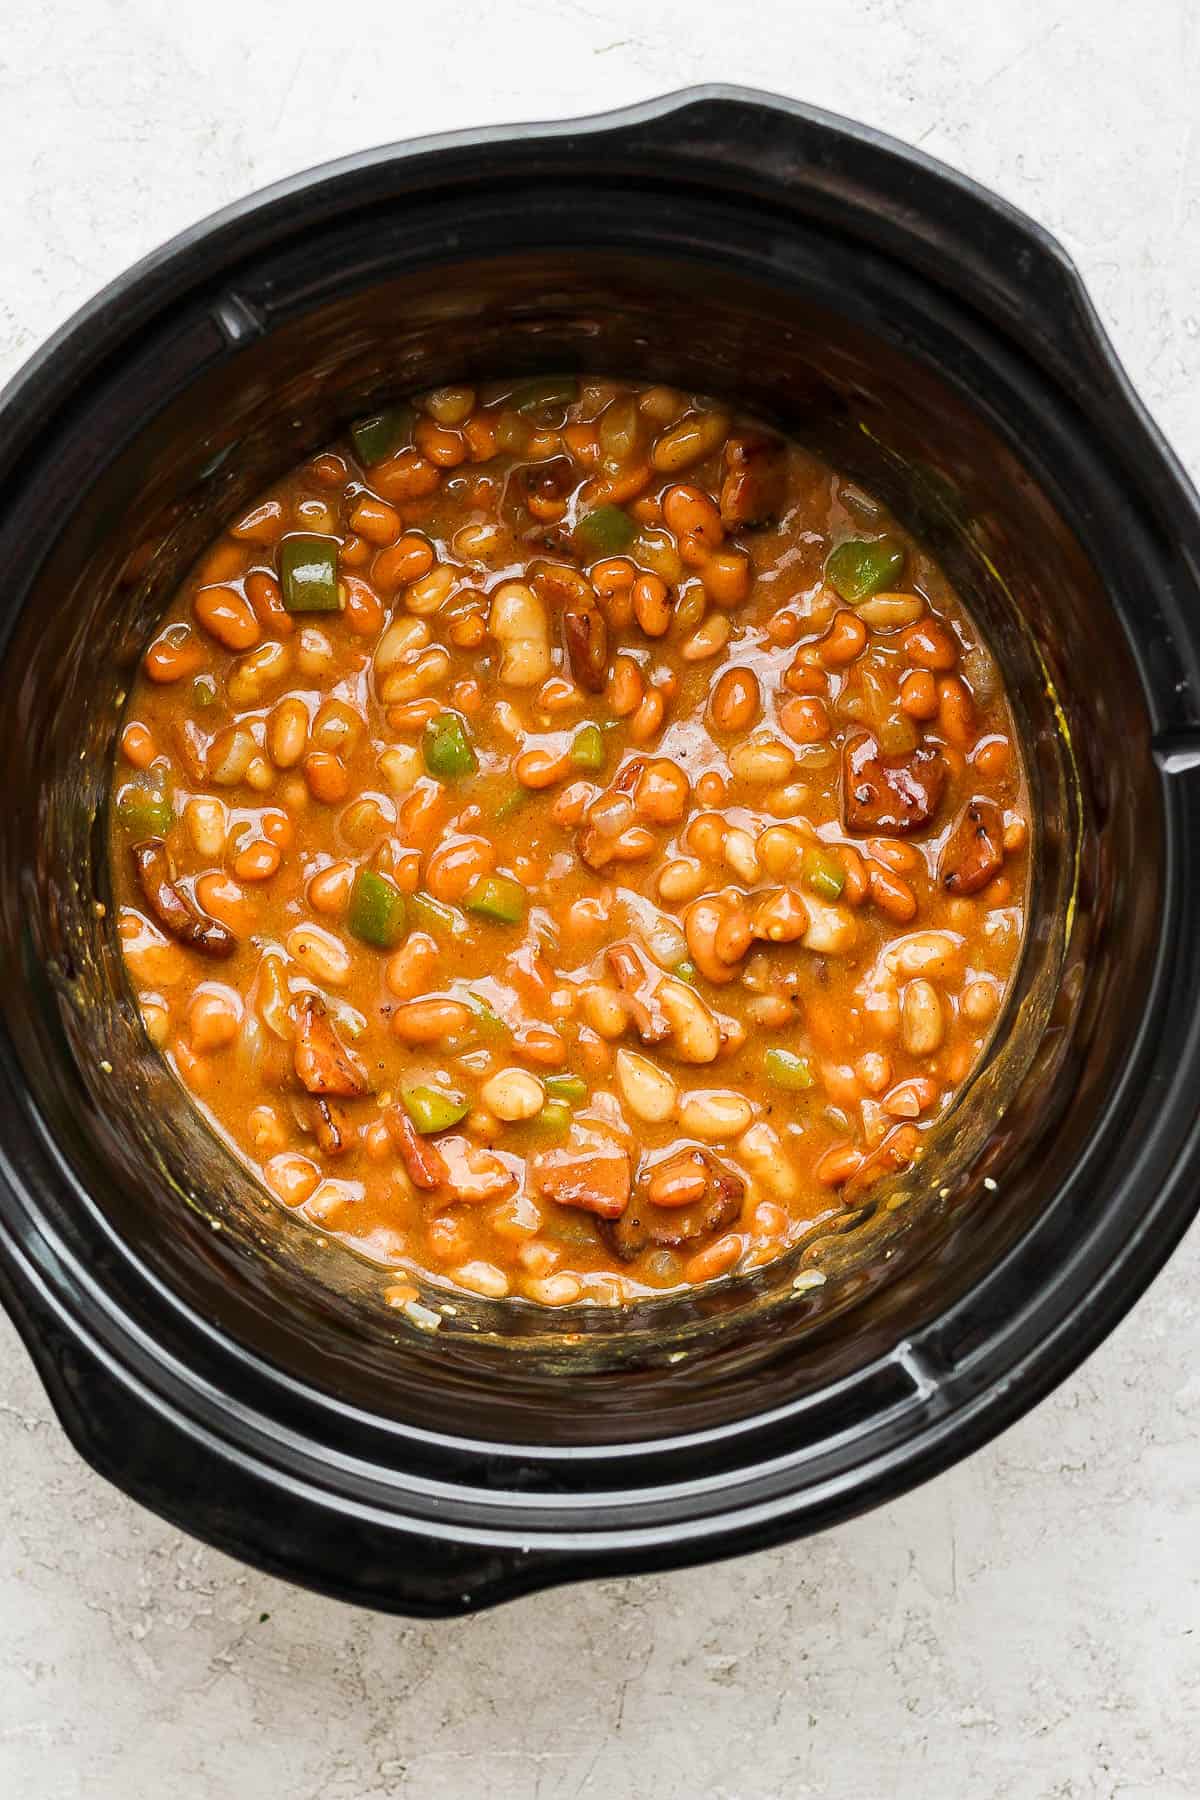 The slow cooker baked beans after cooking.